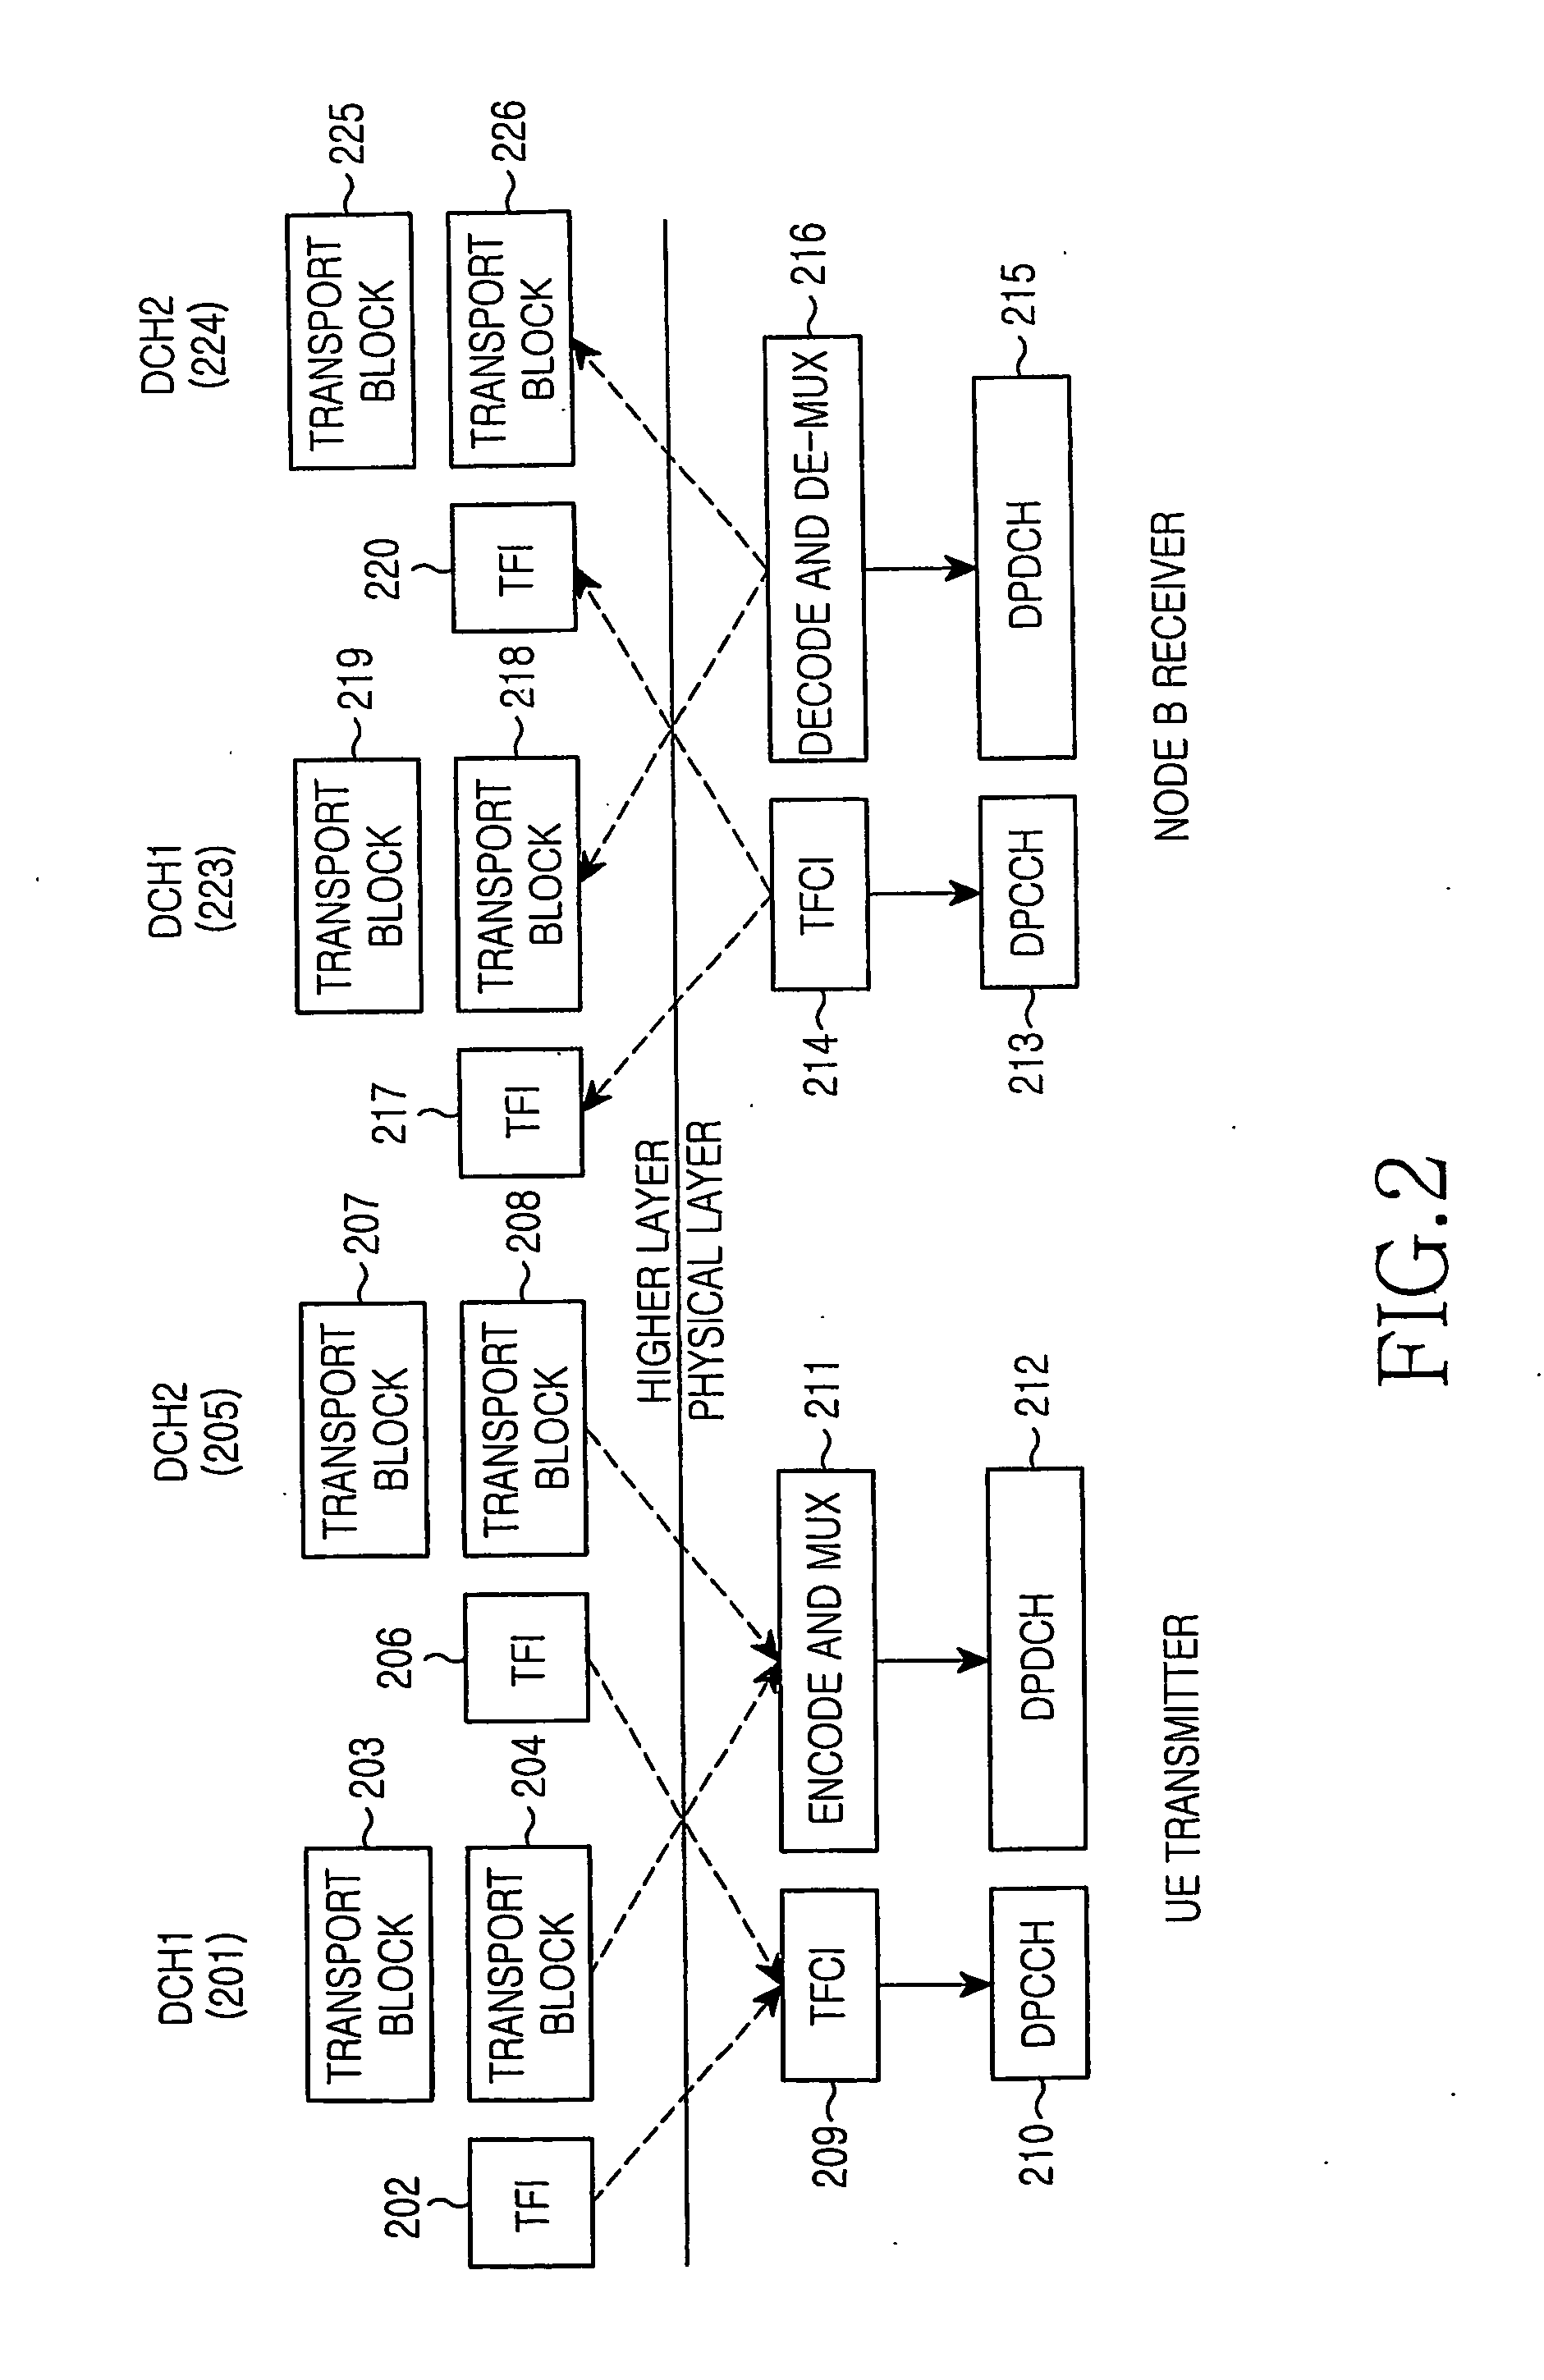 Method For Supporting Pilot Boost In E-Dch Of Wcdma